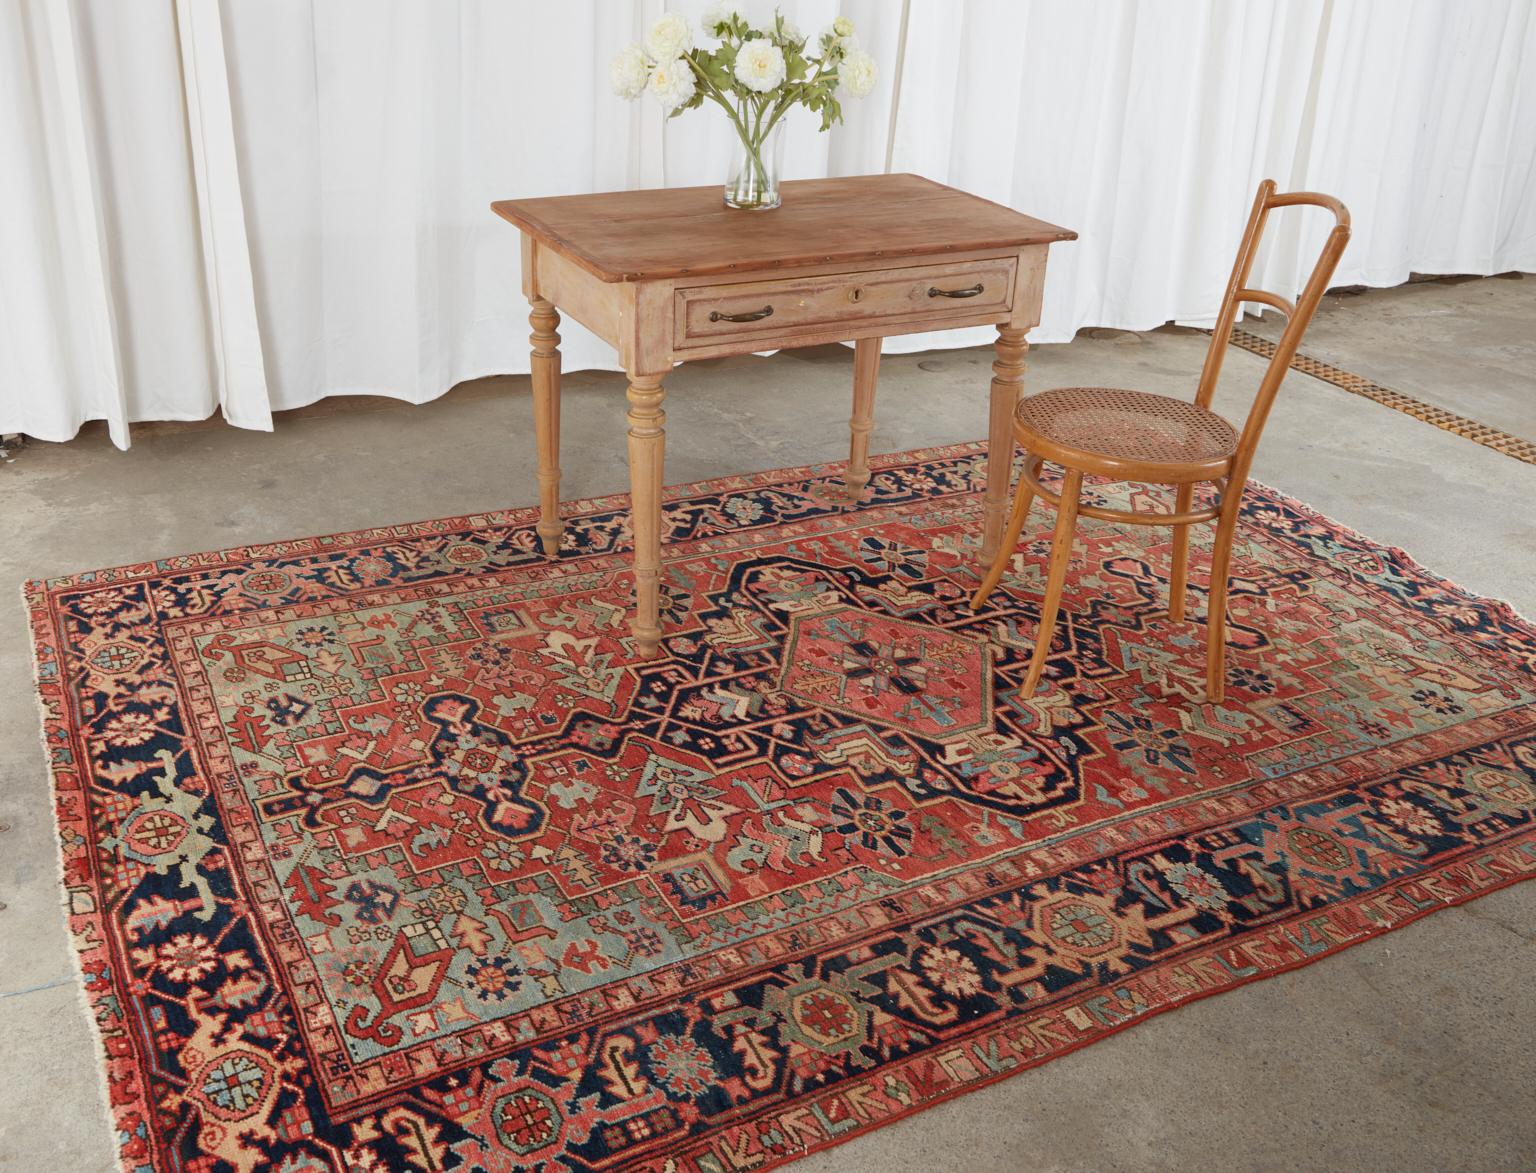 Fascinating antique 1920s Persian Heriz hand-knotted wool rug with a cotton warp. All natural dyes with vibrant colors and desirable wear featuring geometric patterns over a red field. From an estate in Beverly Hills, CA.